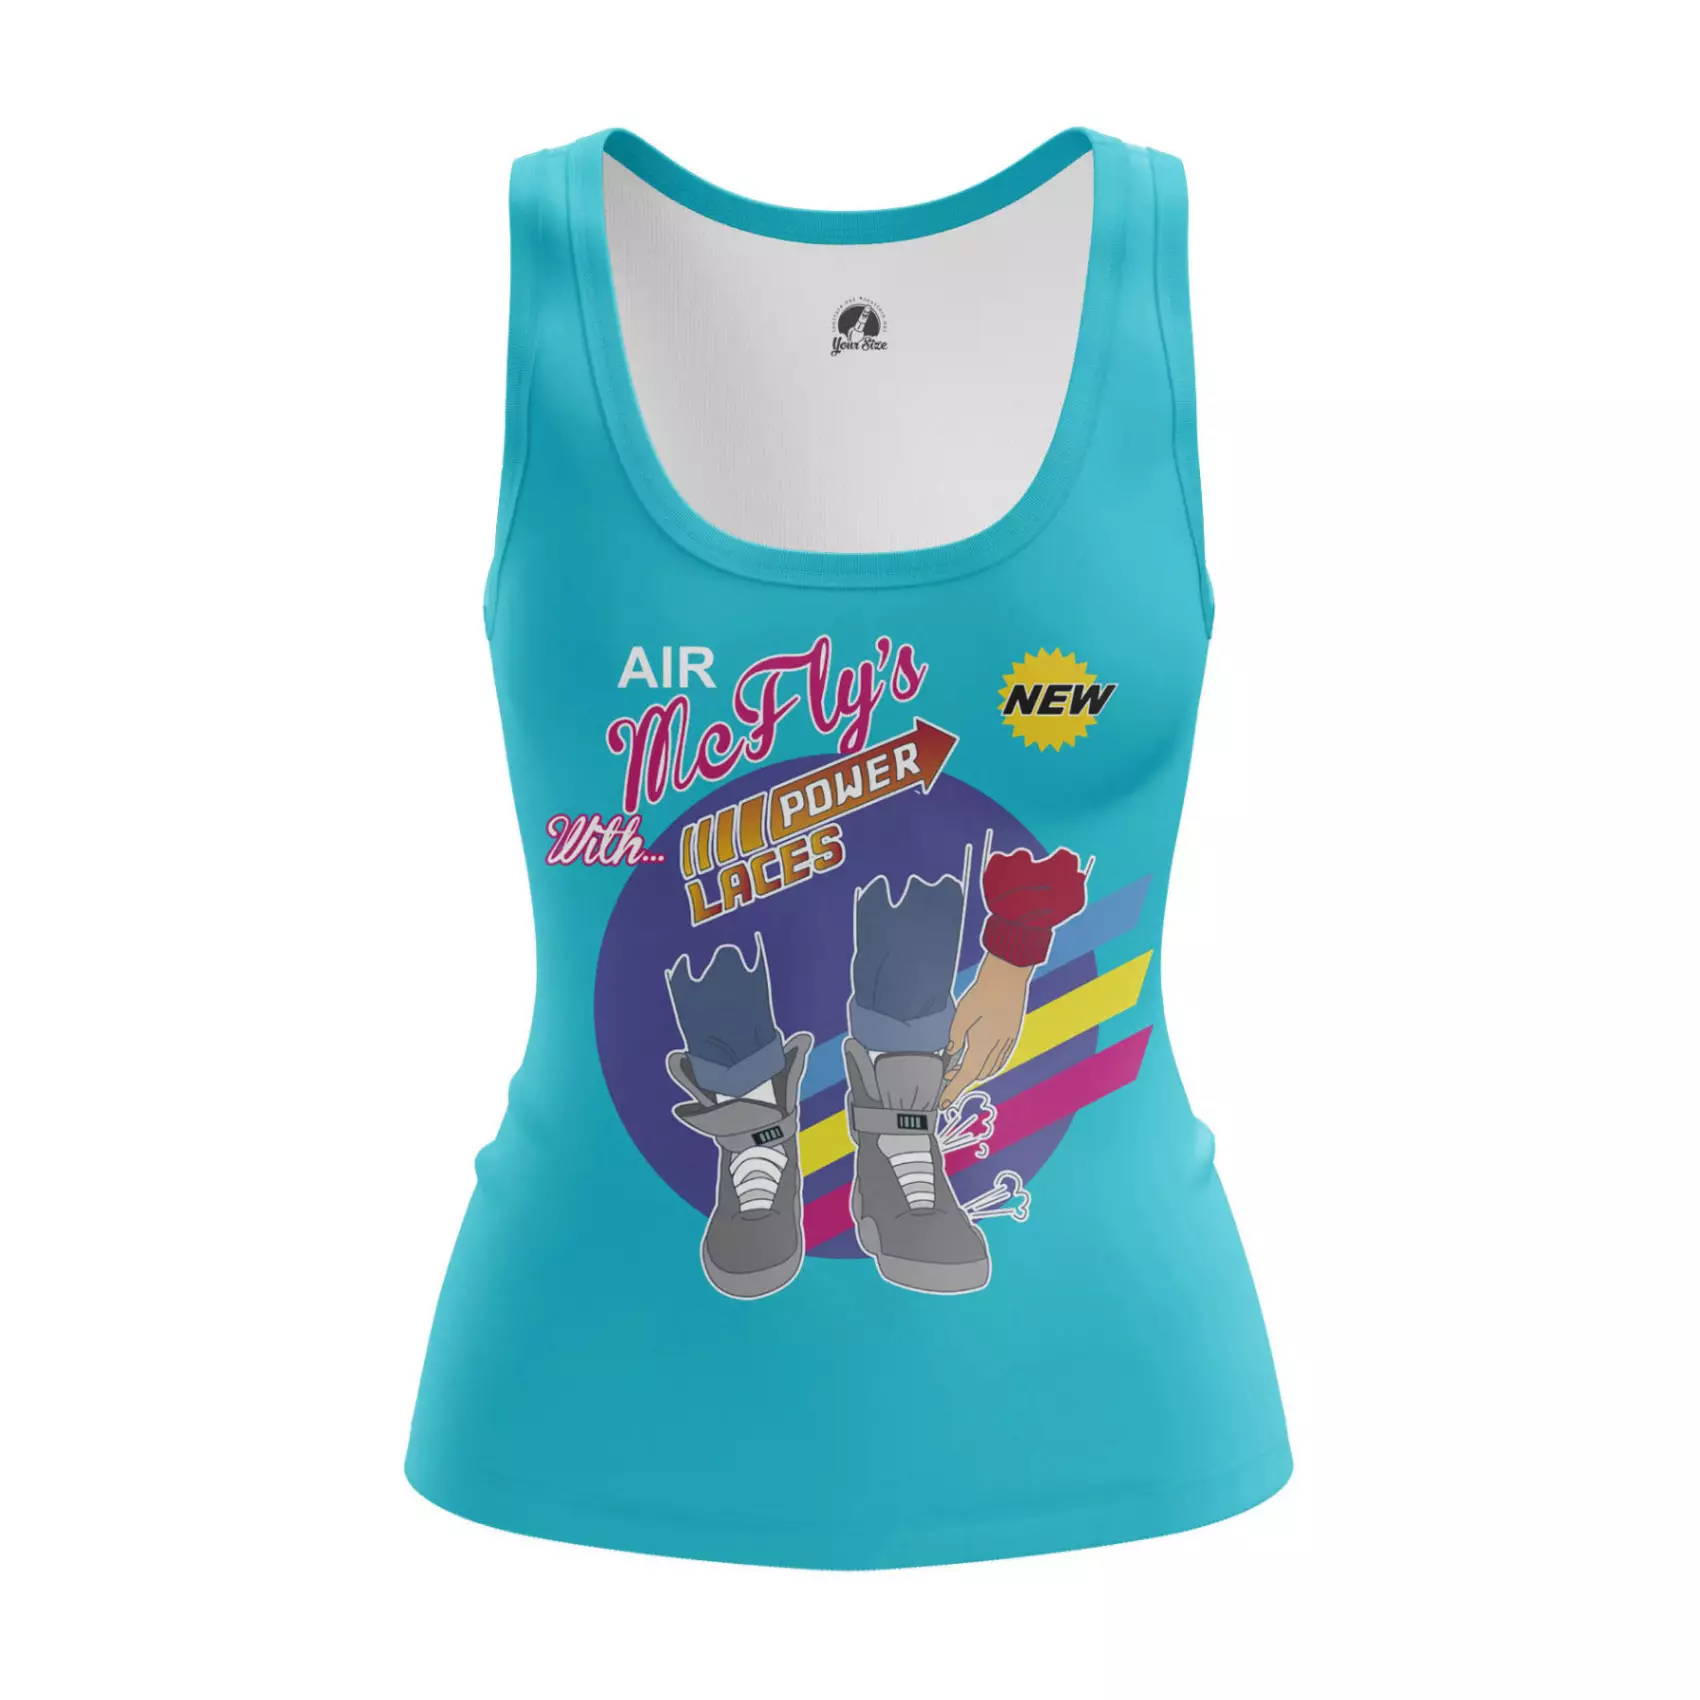 Women’s tank Mcfly’s Power Laces Back to Future Vest Idolstore - Merchandise and Collectibles Merchandise, Toys and Collectibles 2